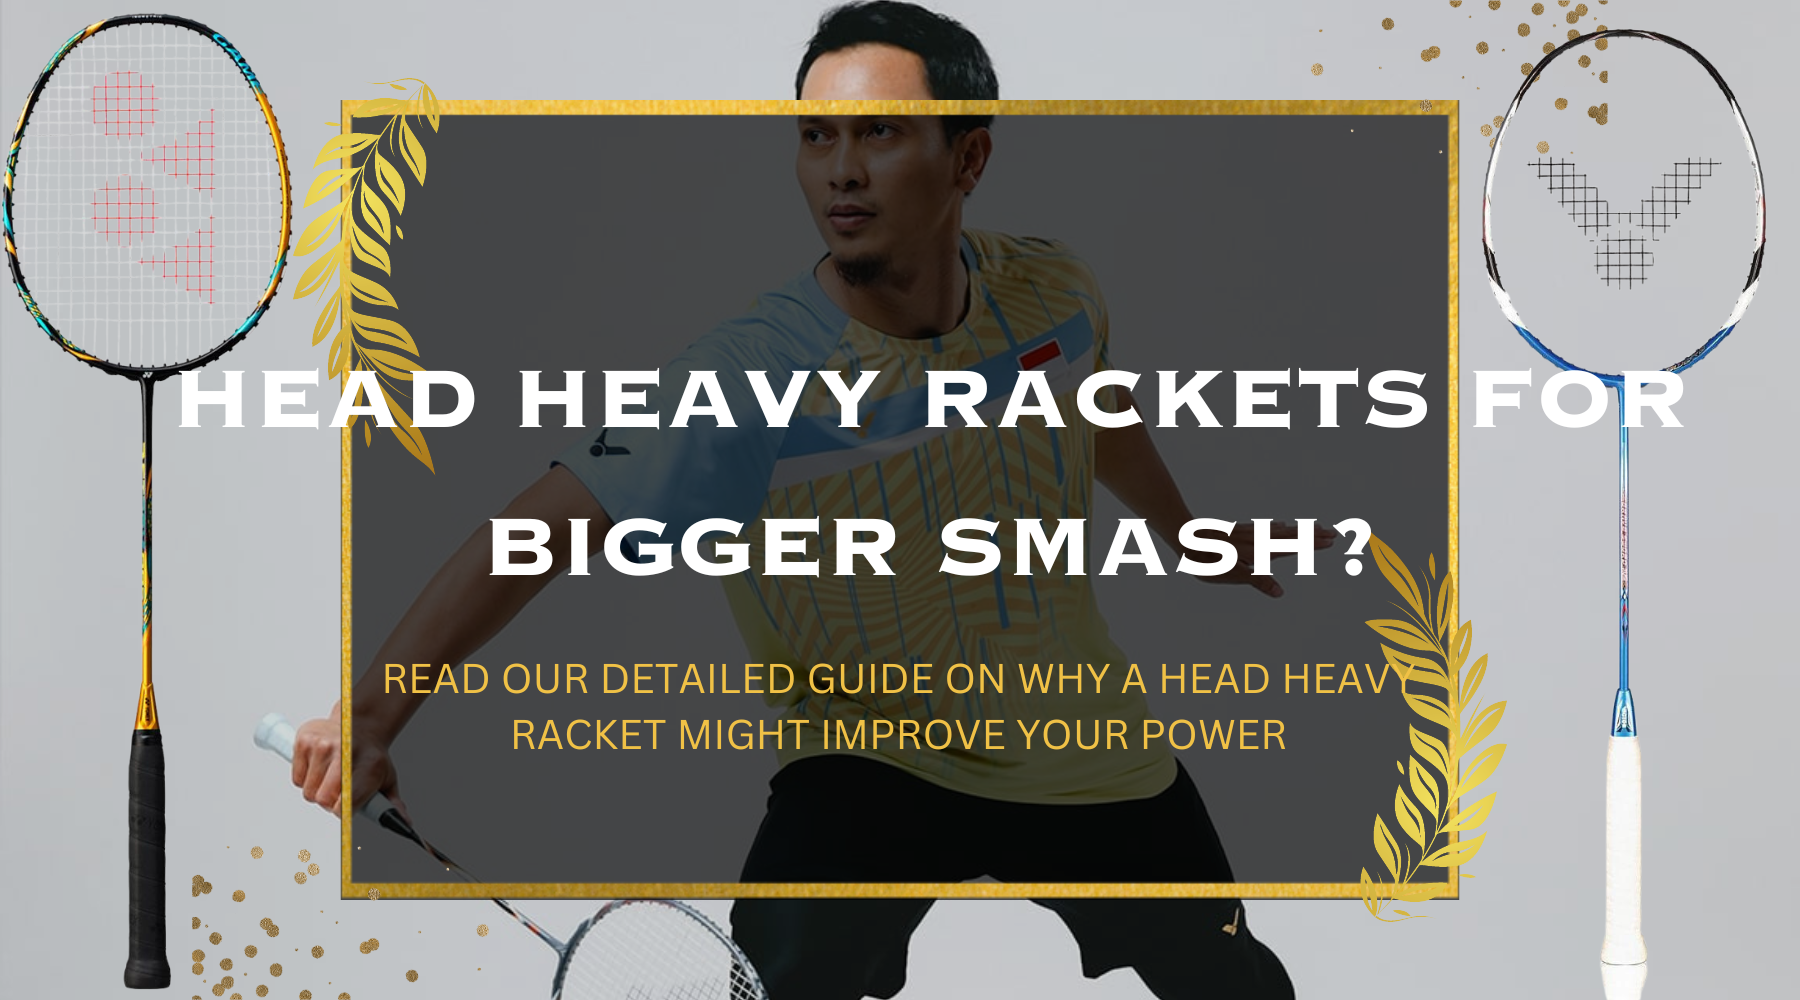 Unleashing Power and Precision: The Benefits of a Head-Heavy Badminton Racket